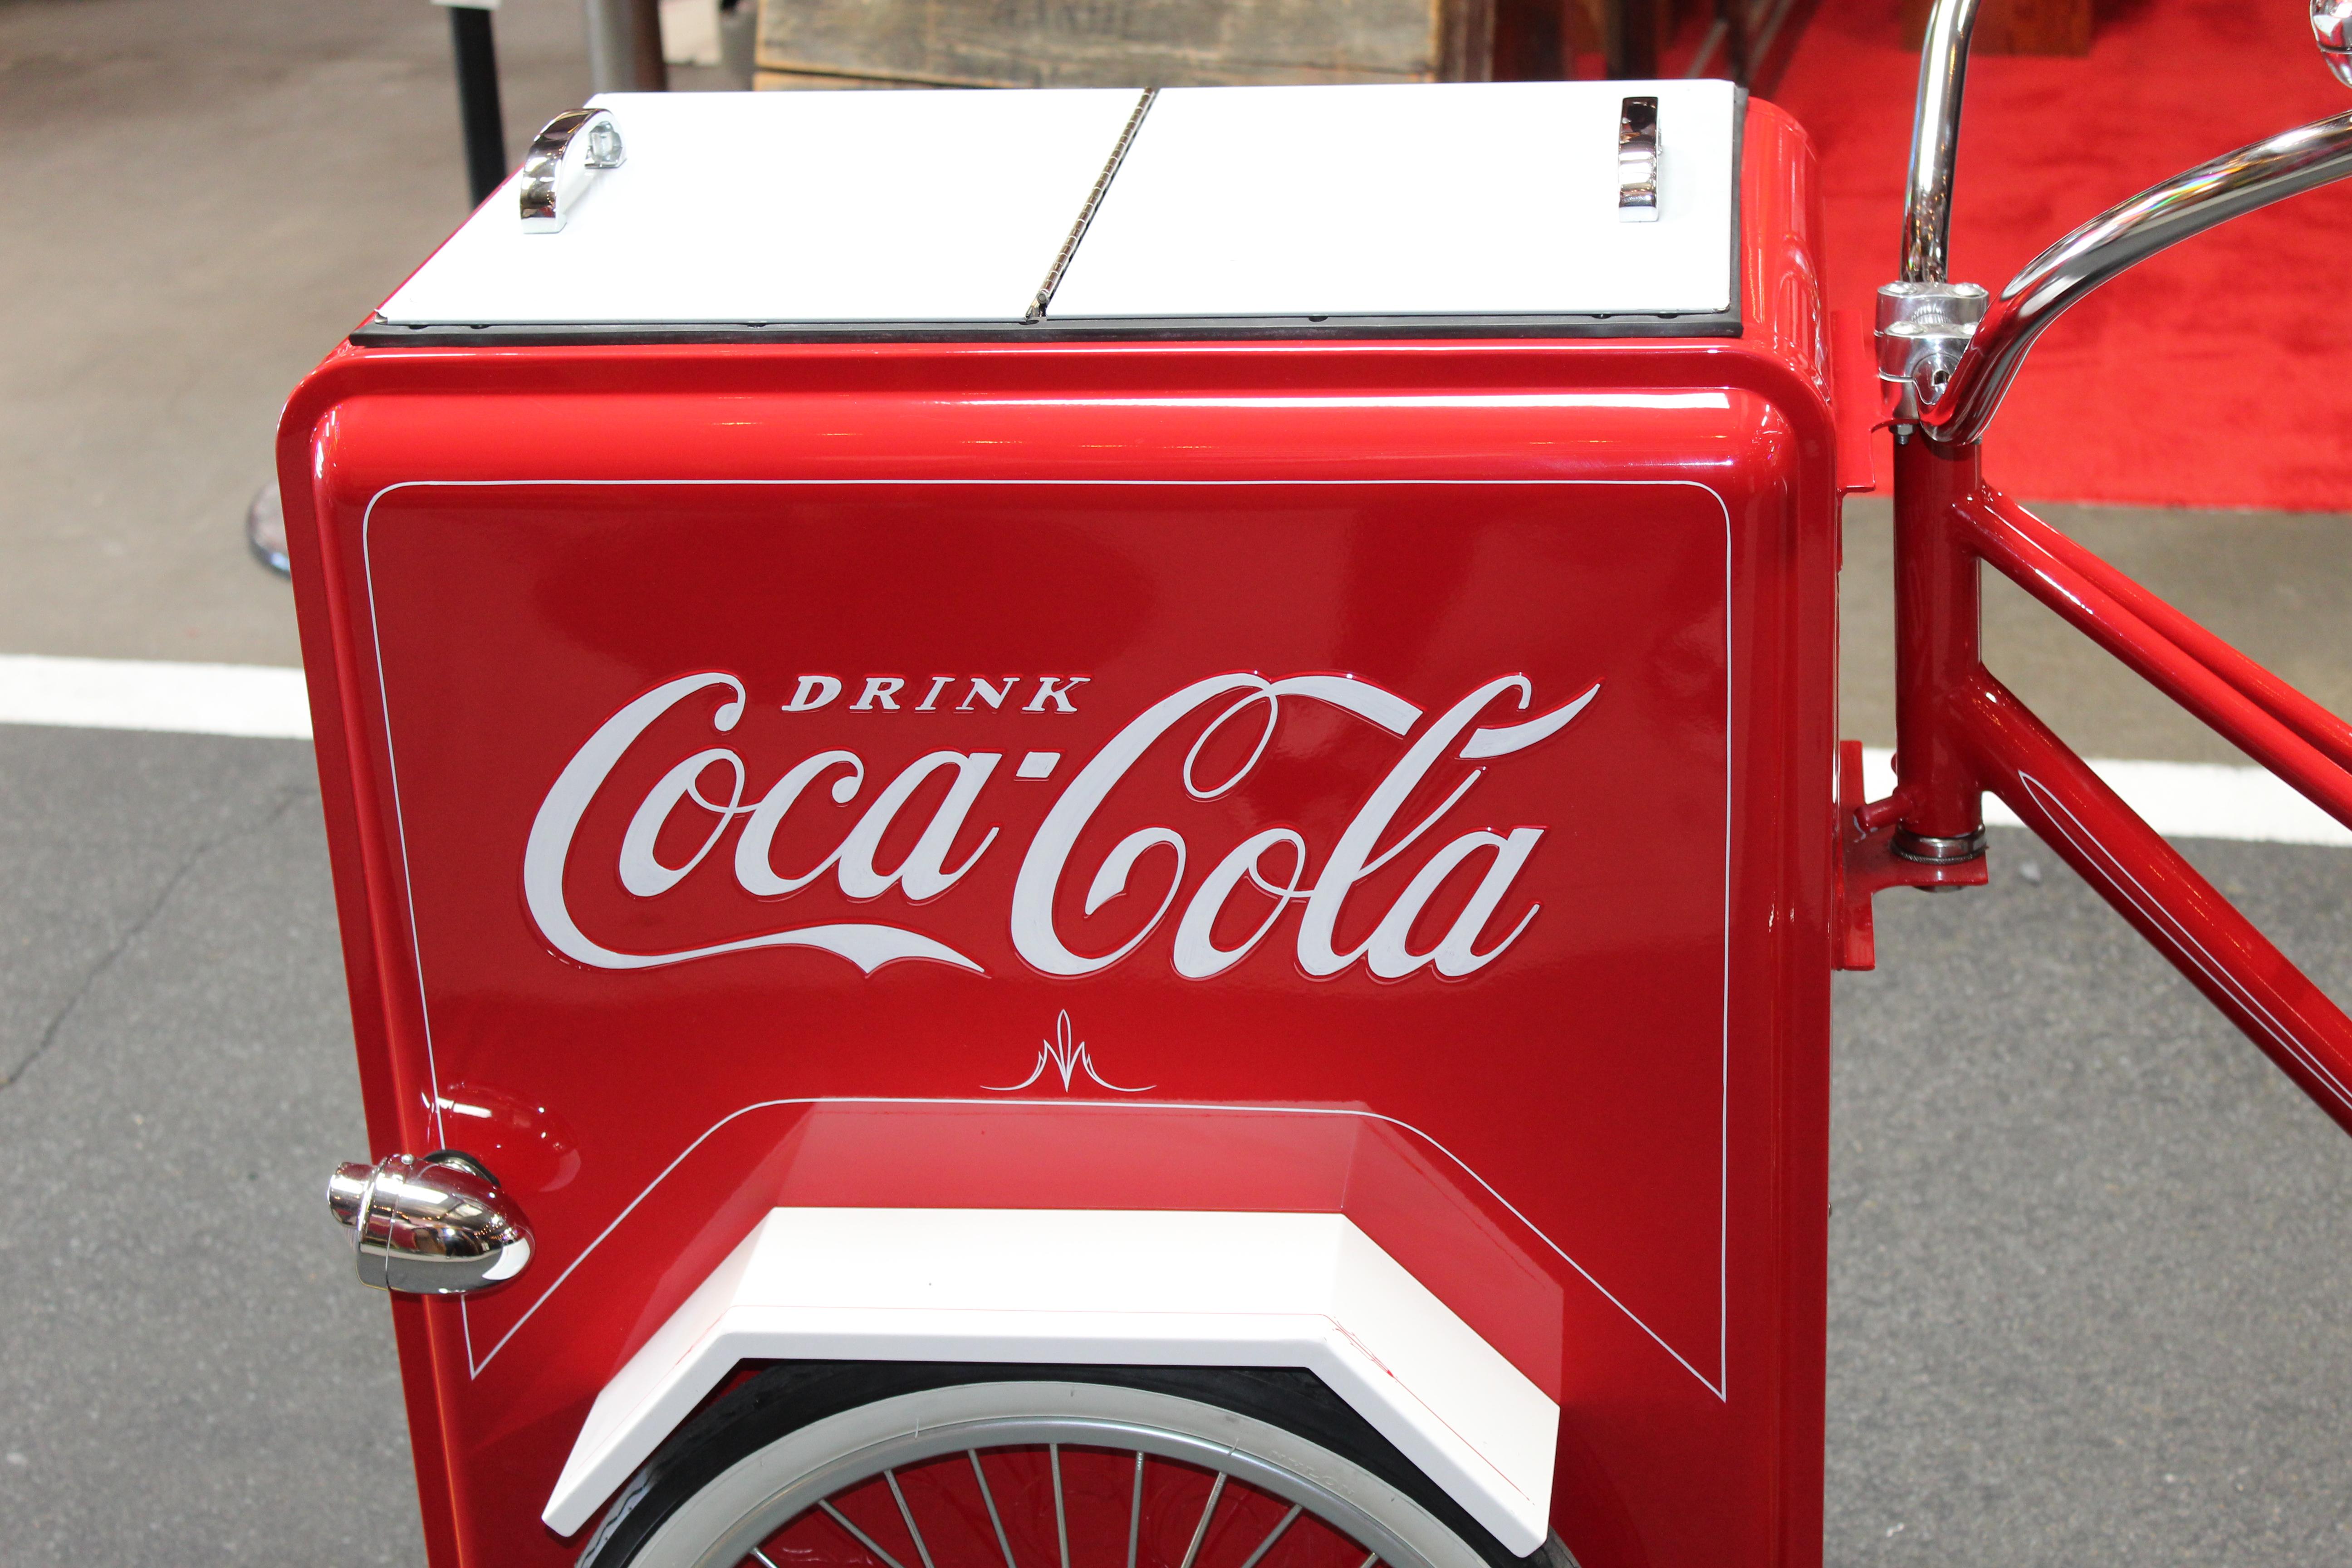 Amazing bicycle turned into Ice Chest. Complete coca cola theme. This is a reproduction item thats customized and hand built. Hand painted pin stripping. Rear fender has a small dent but over all bike in great condition.